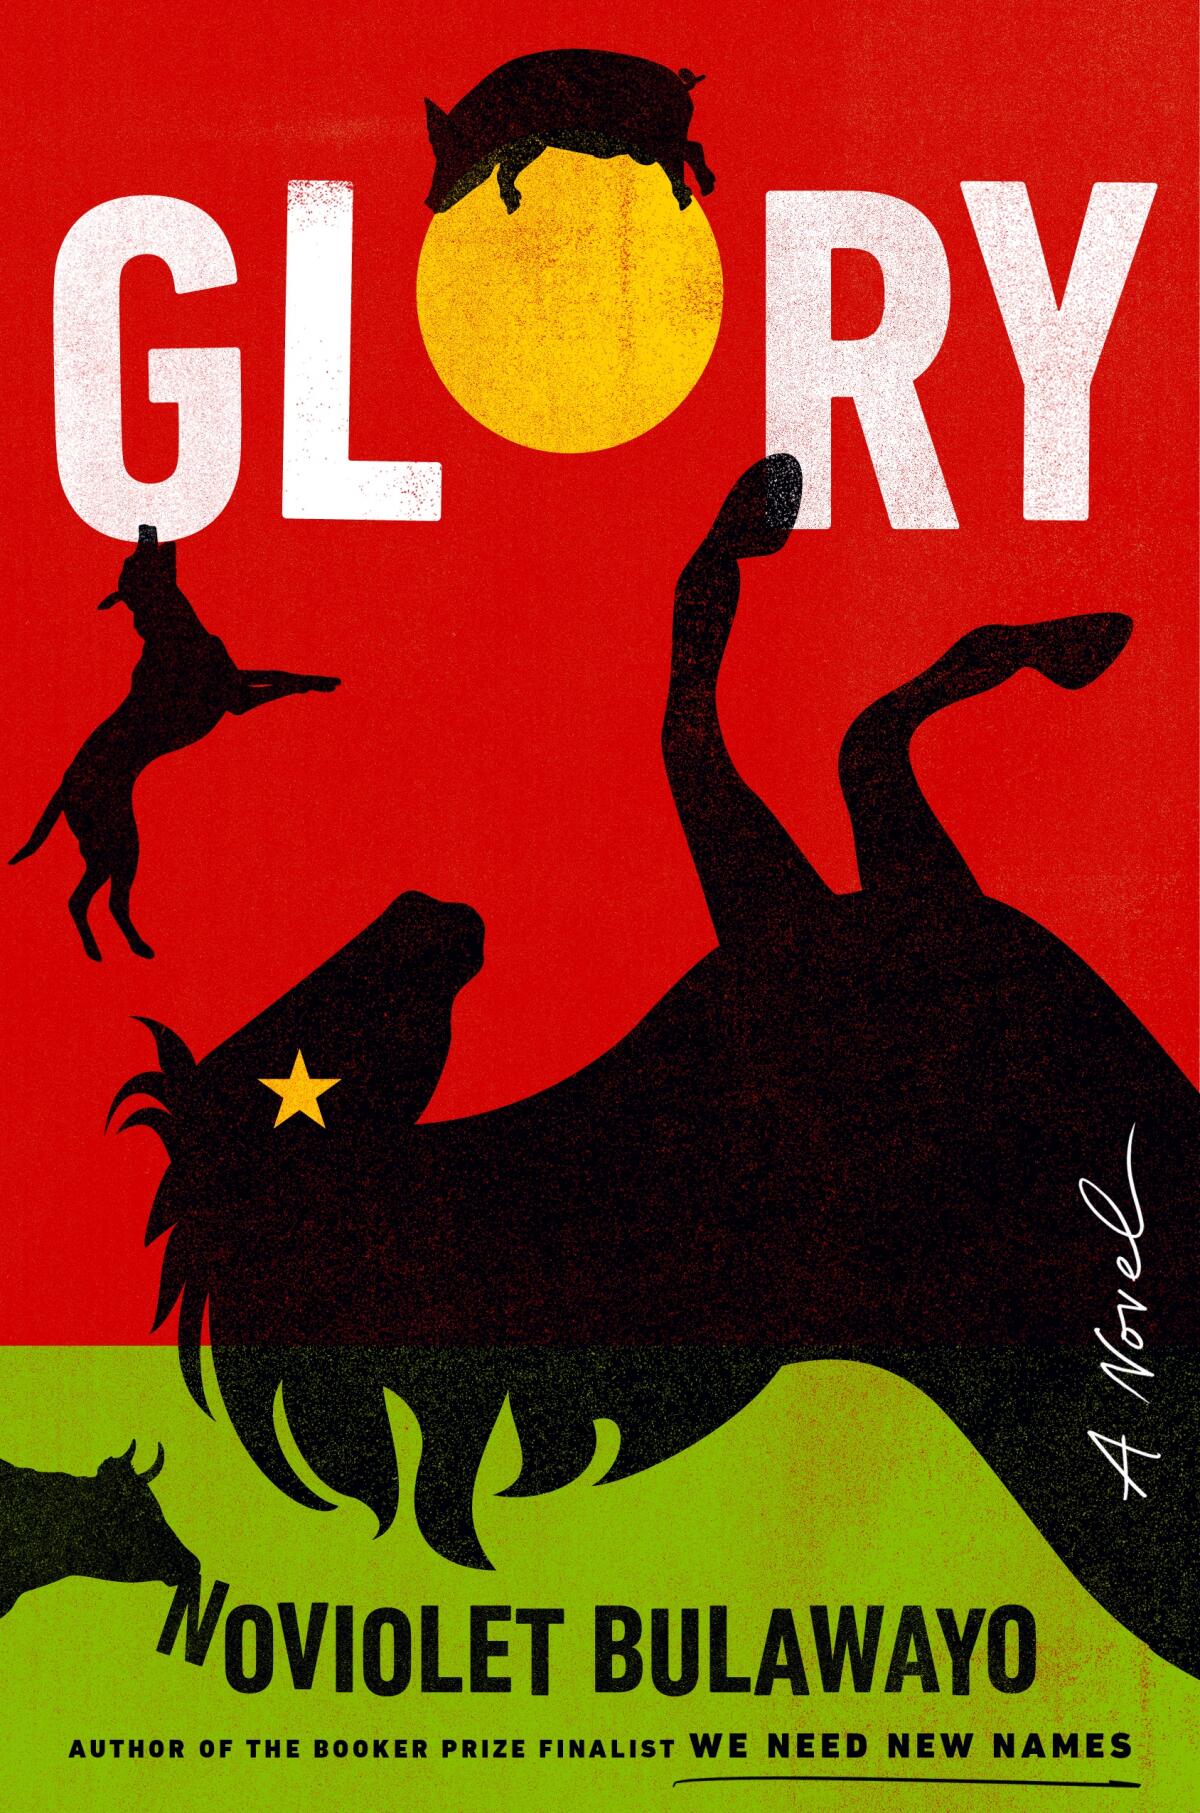 The cover of "Glory" by Noviolet Bulawayo